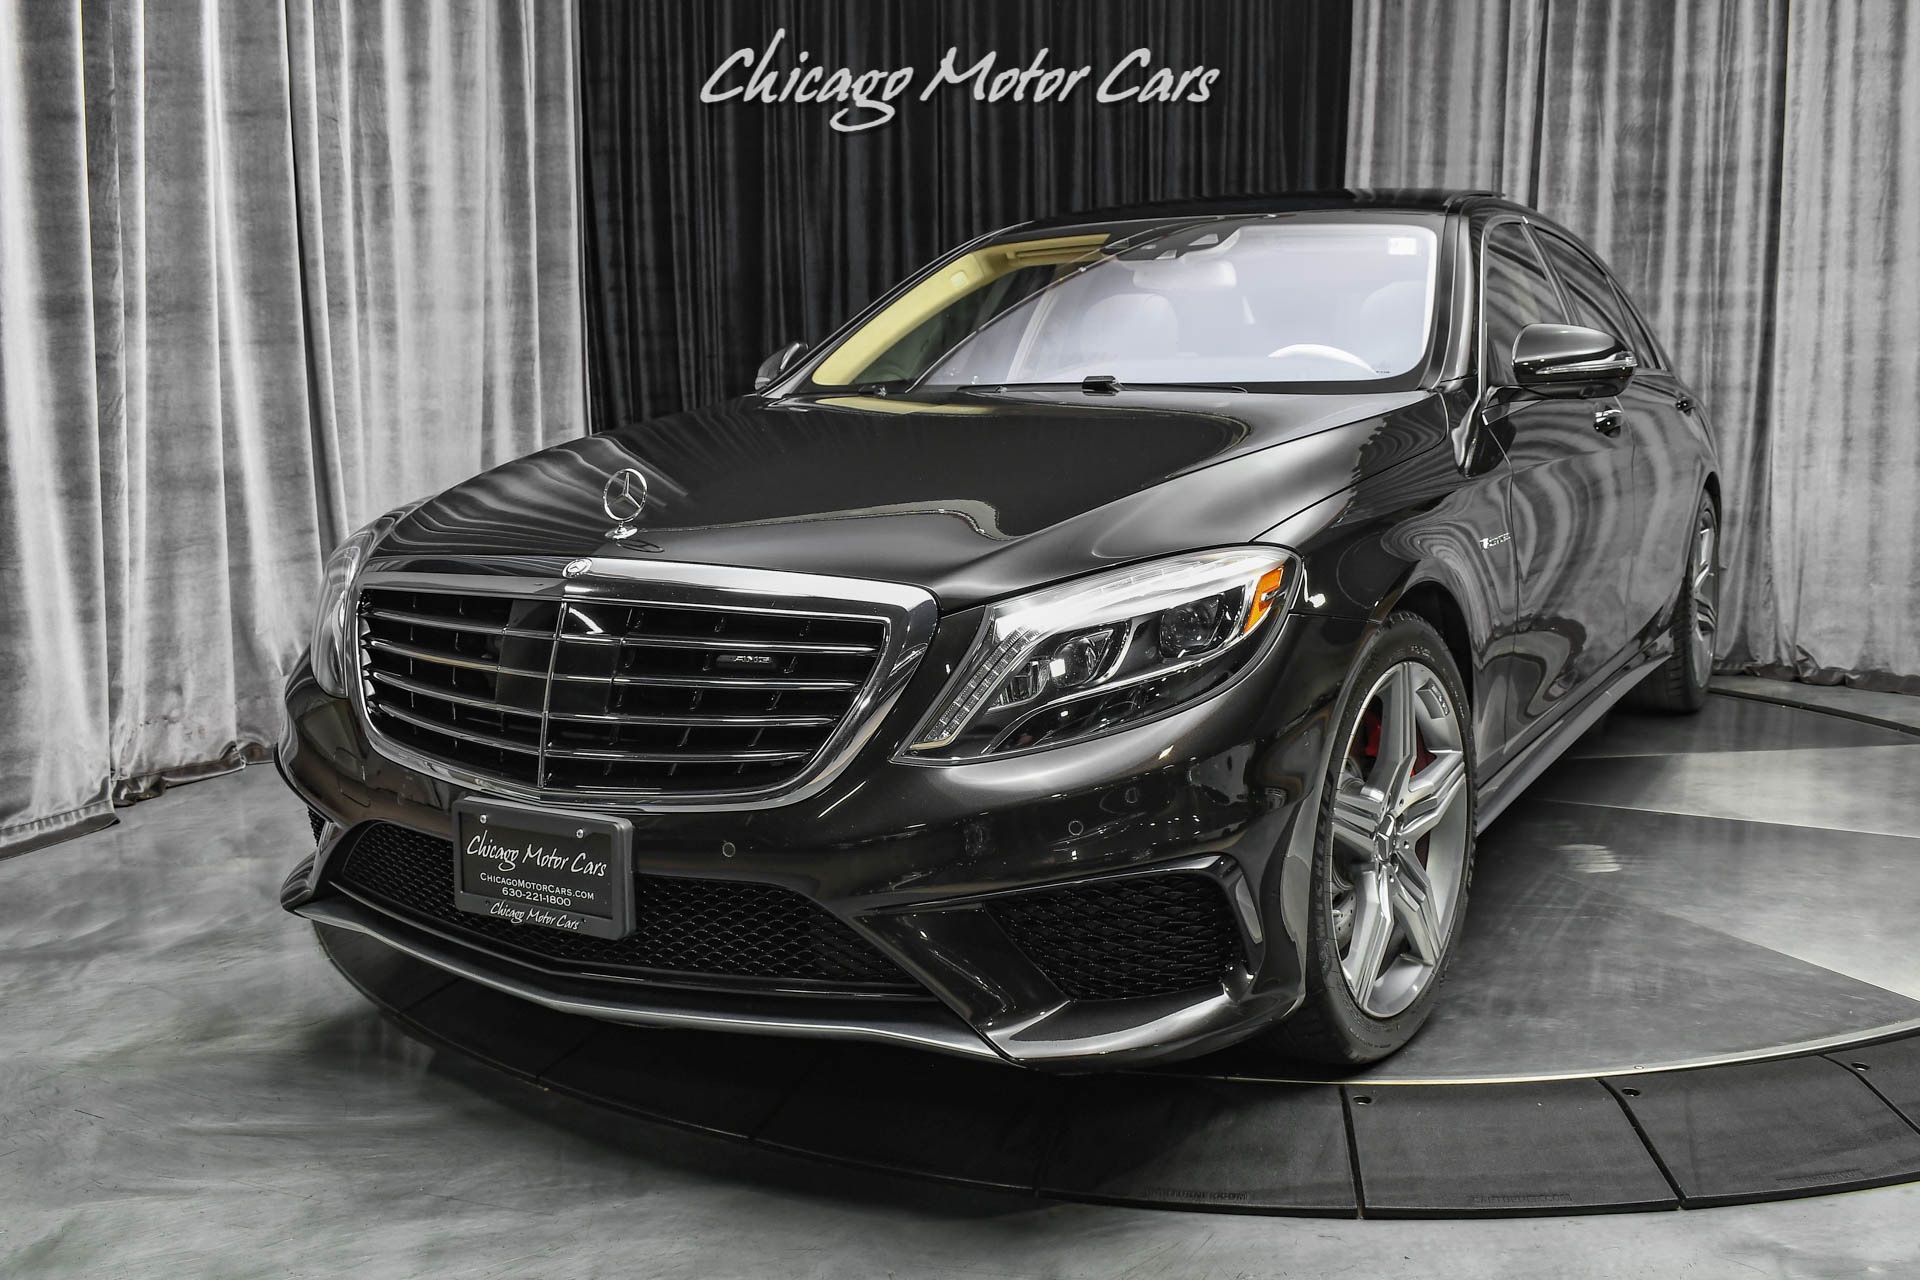 Used-2015-Mercedes-Benz-S63-AMG-4Matic-Sedan-Executive-Rear-Seat-Pack-Burmester-High-End-Audio-LOADED